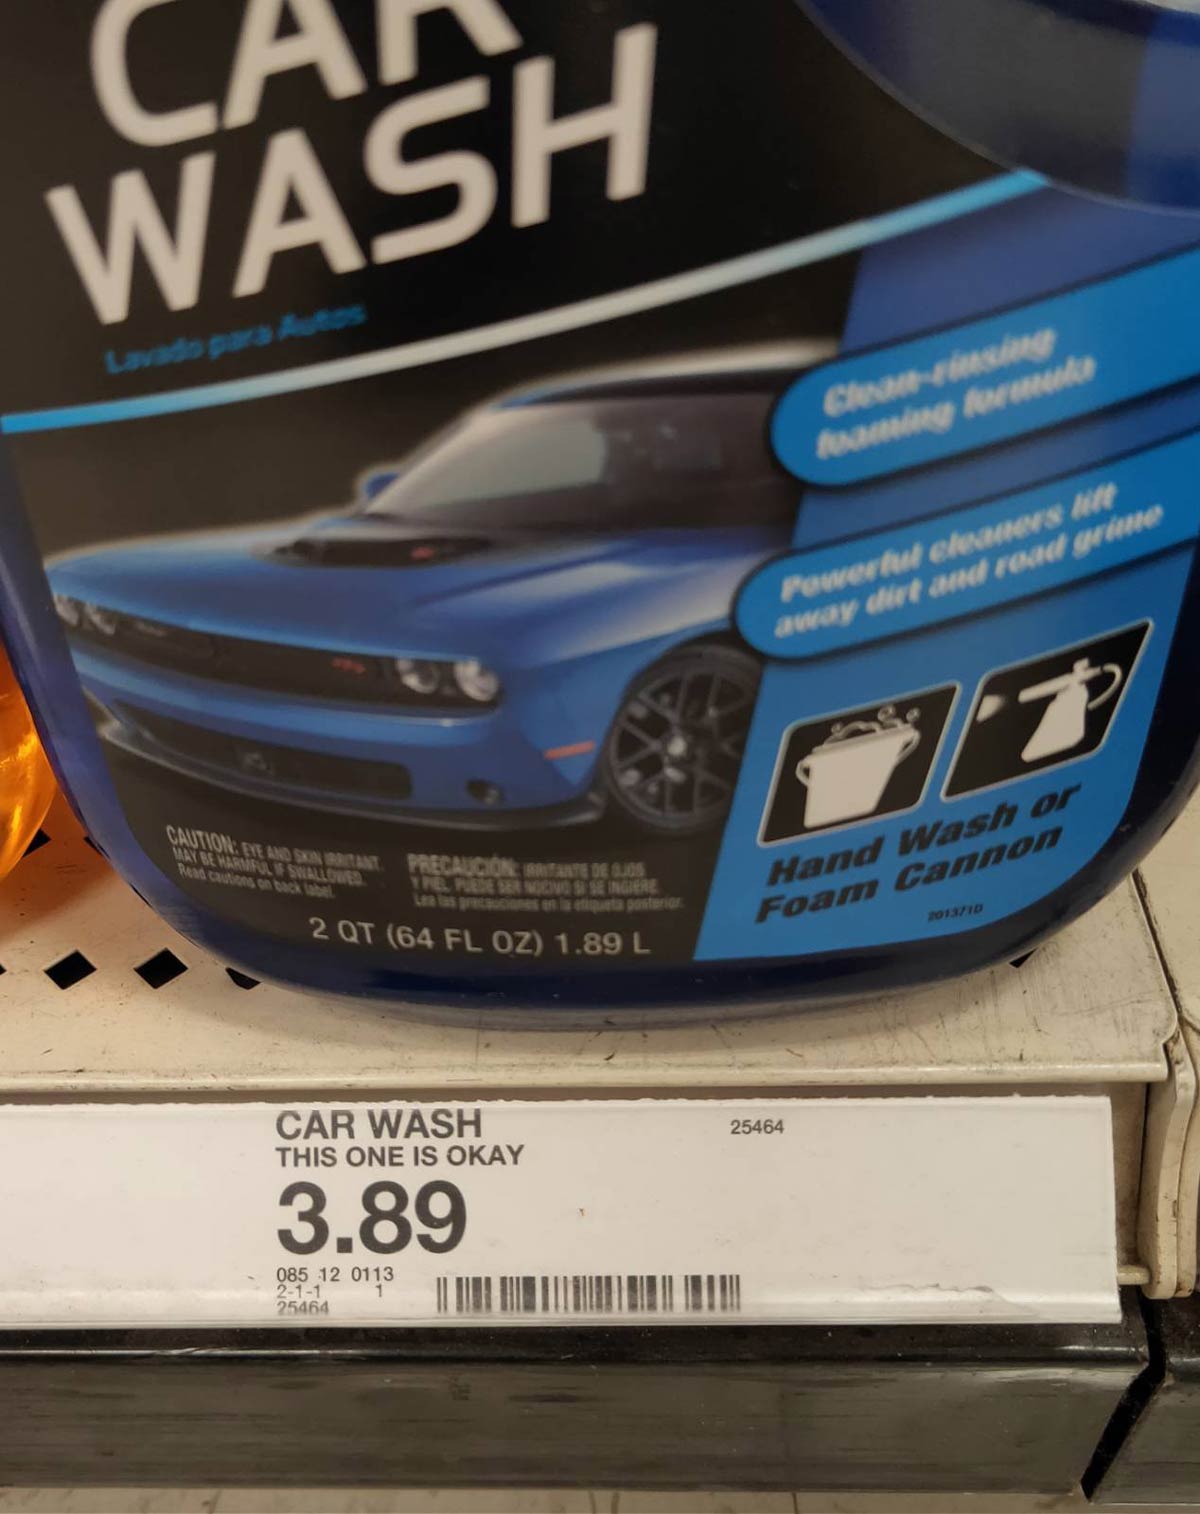 The shelf label I found at Target today sold me on this car shampoo